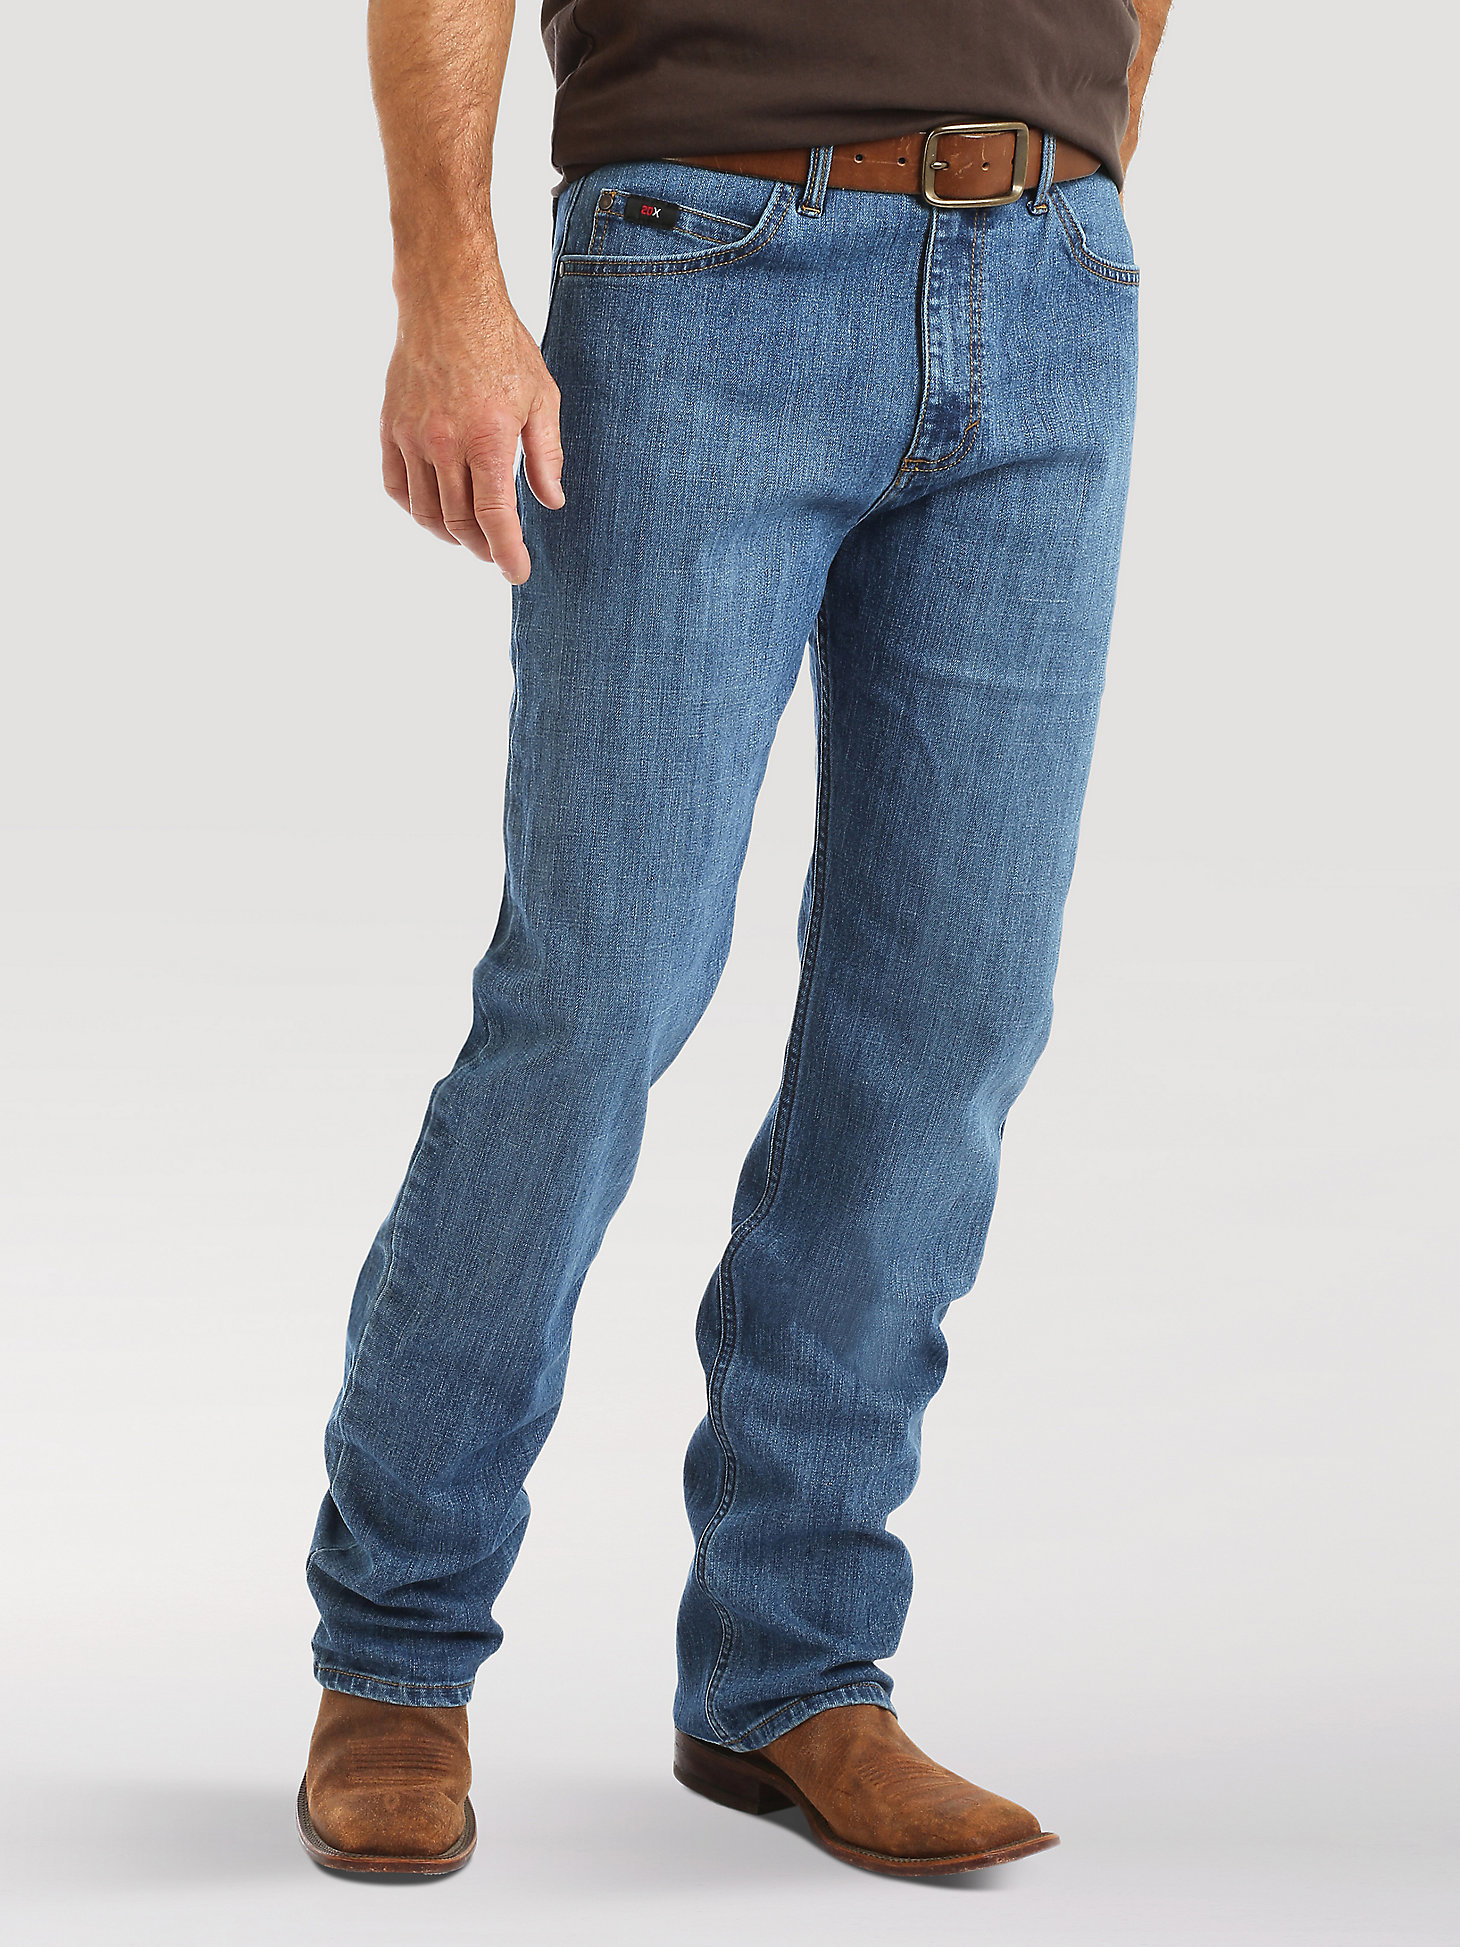 Men's Wrangler® 20X® Active Flex Relaxed Fit Jean in Admiral Blue alternative view 1